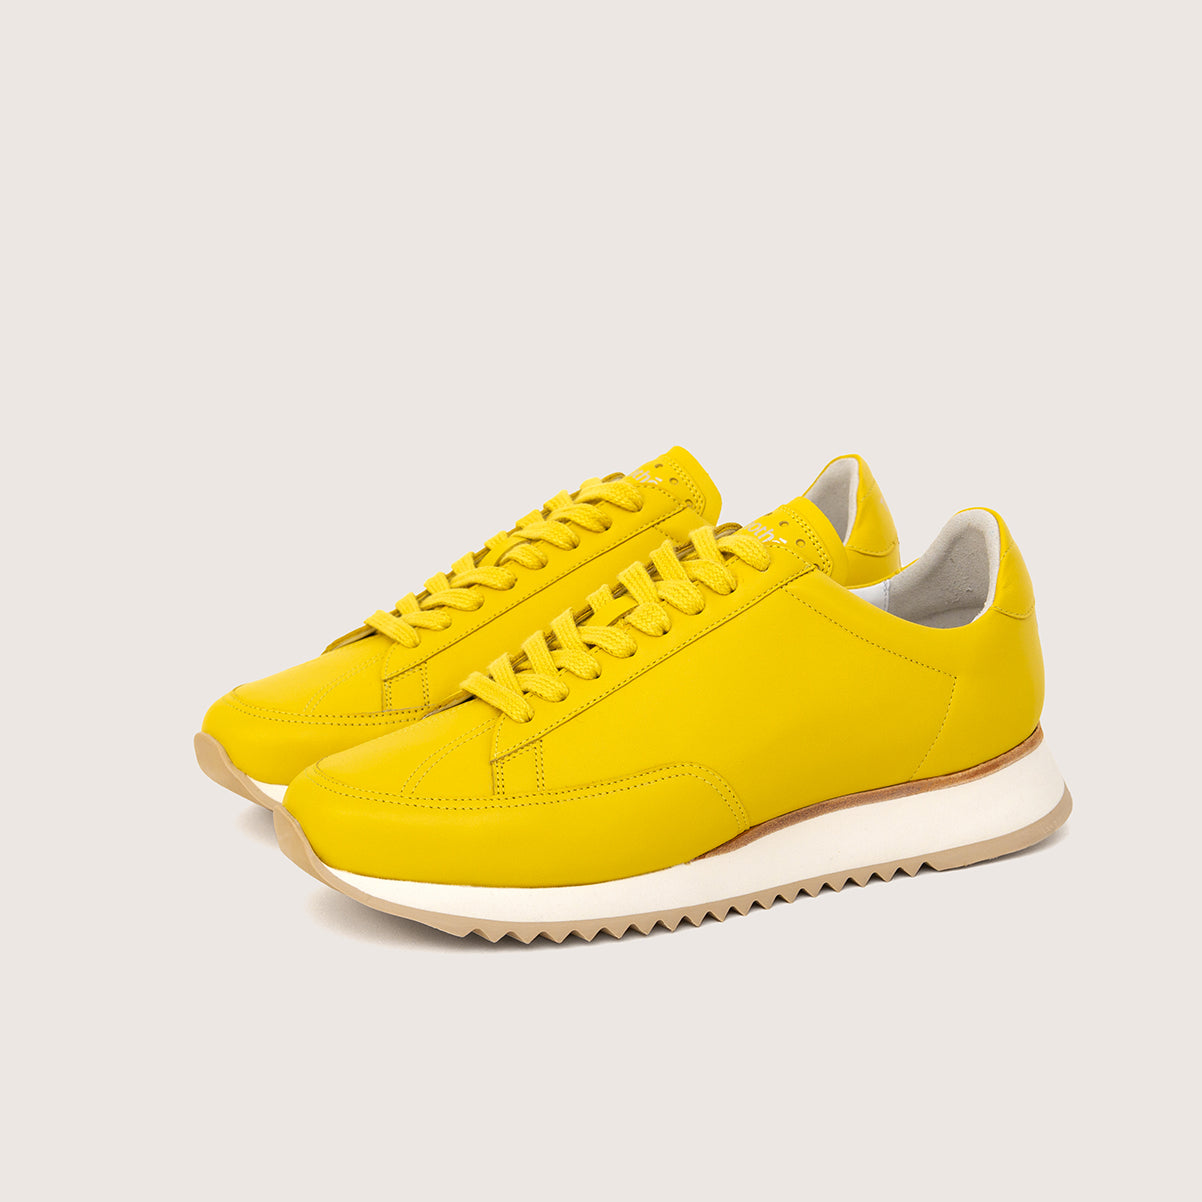 sneaker-cabourg-nappa-butter-yellow-timothee-paris-quarter-view-lifestyle-brand-small-size-picture